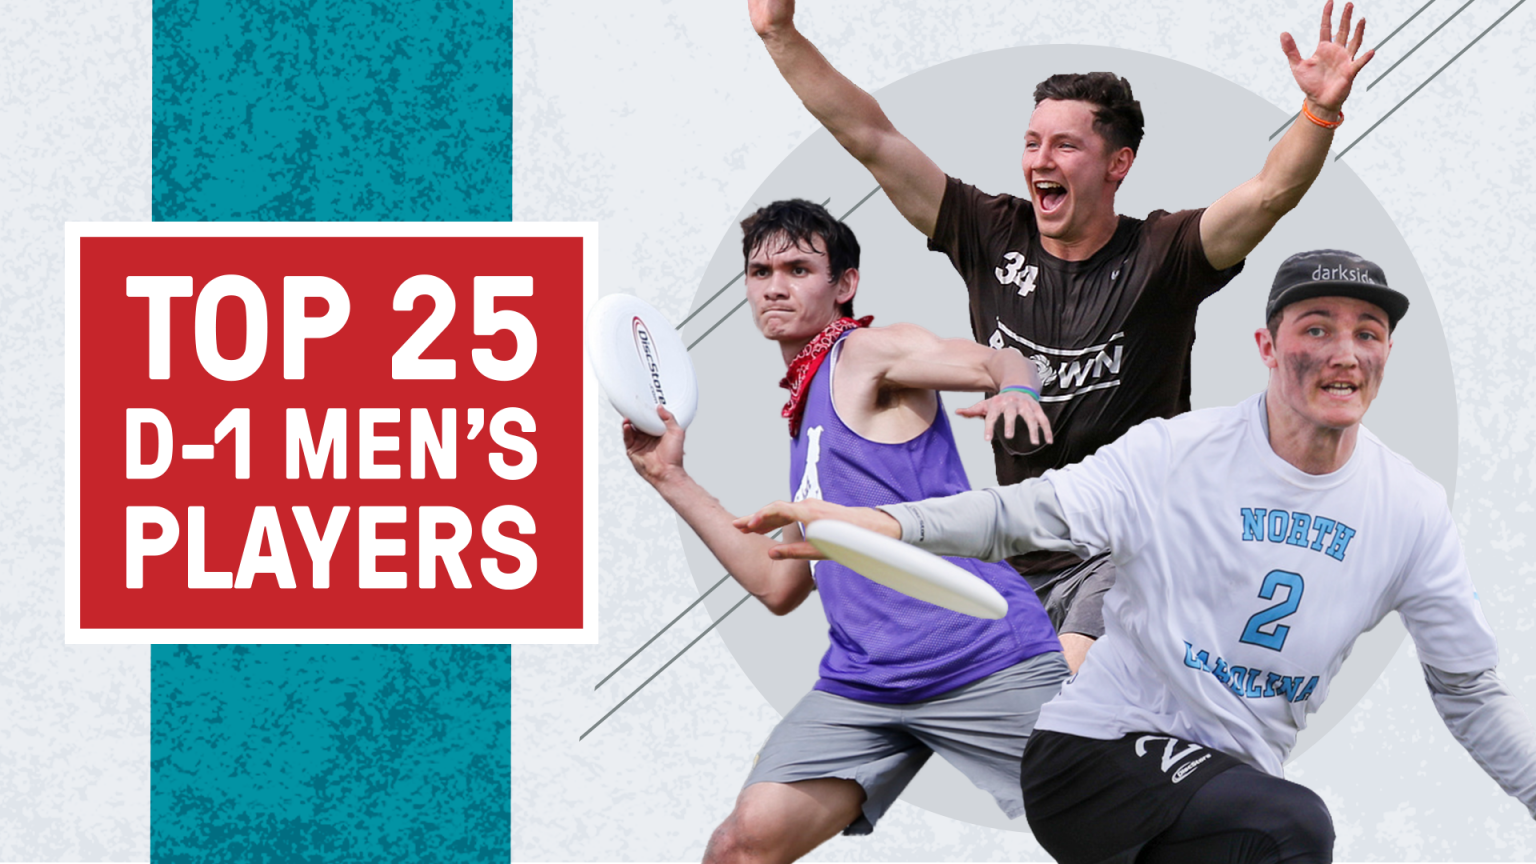 The Top 25 DI Men’s College Players 2020 (Part 1 110) Ultiworld